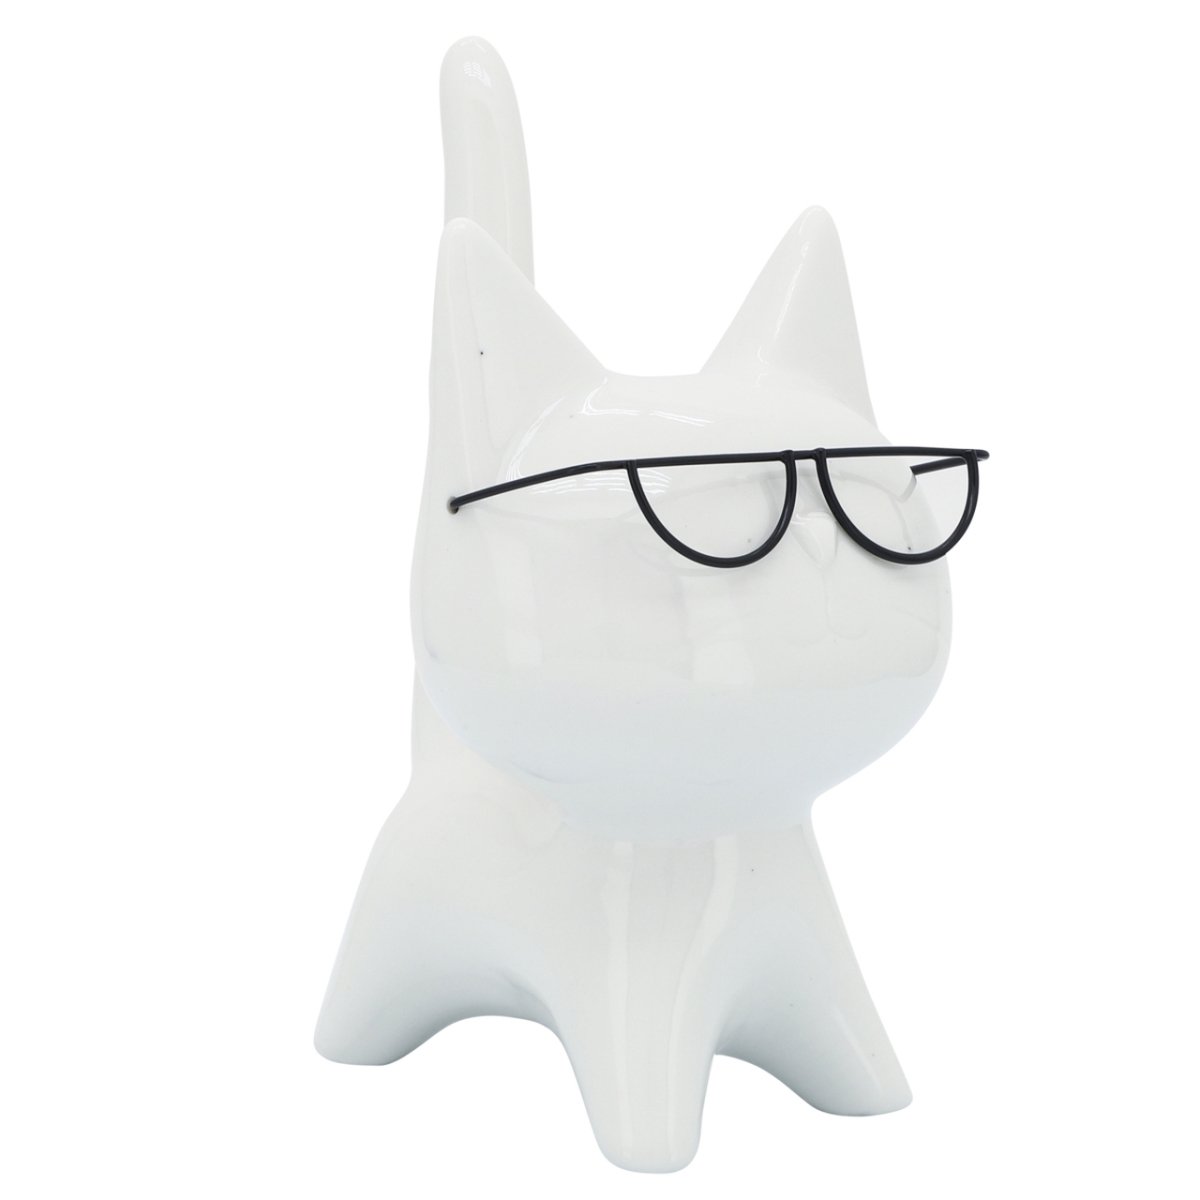 Picture of Sagebrook Home 16931 8 in. Porcelain Kitty Figurine with Glasses, White